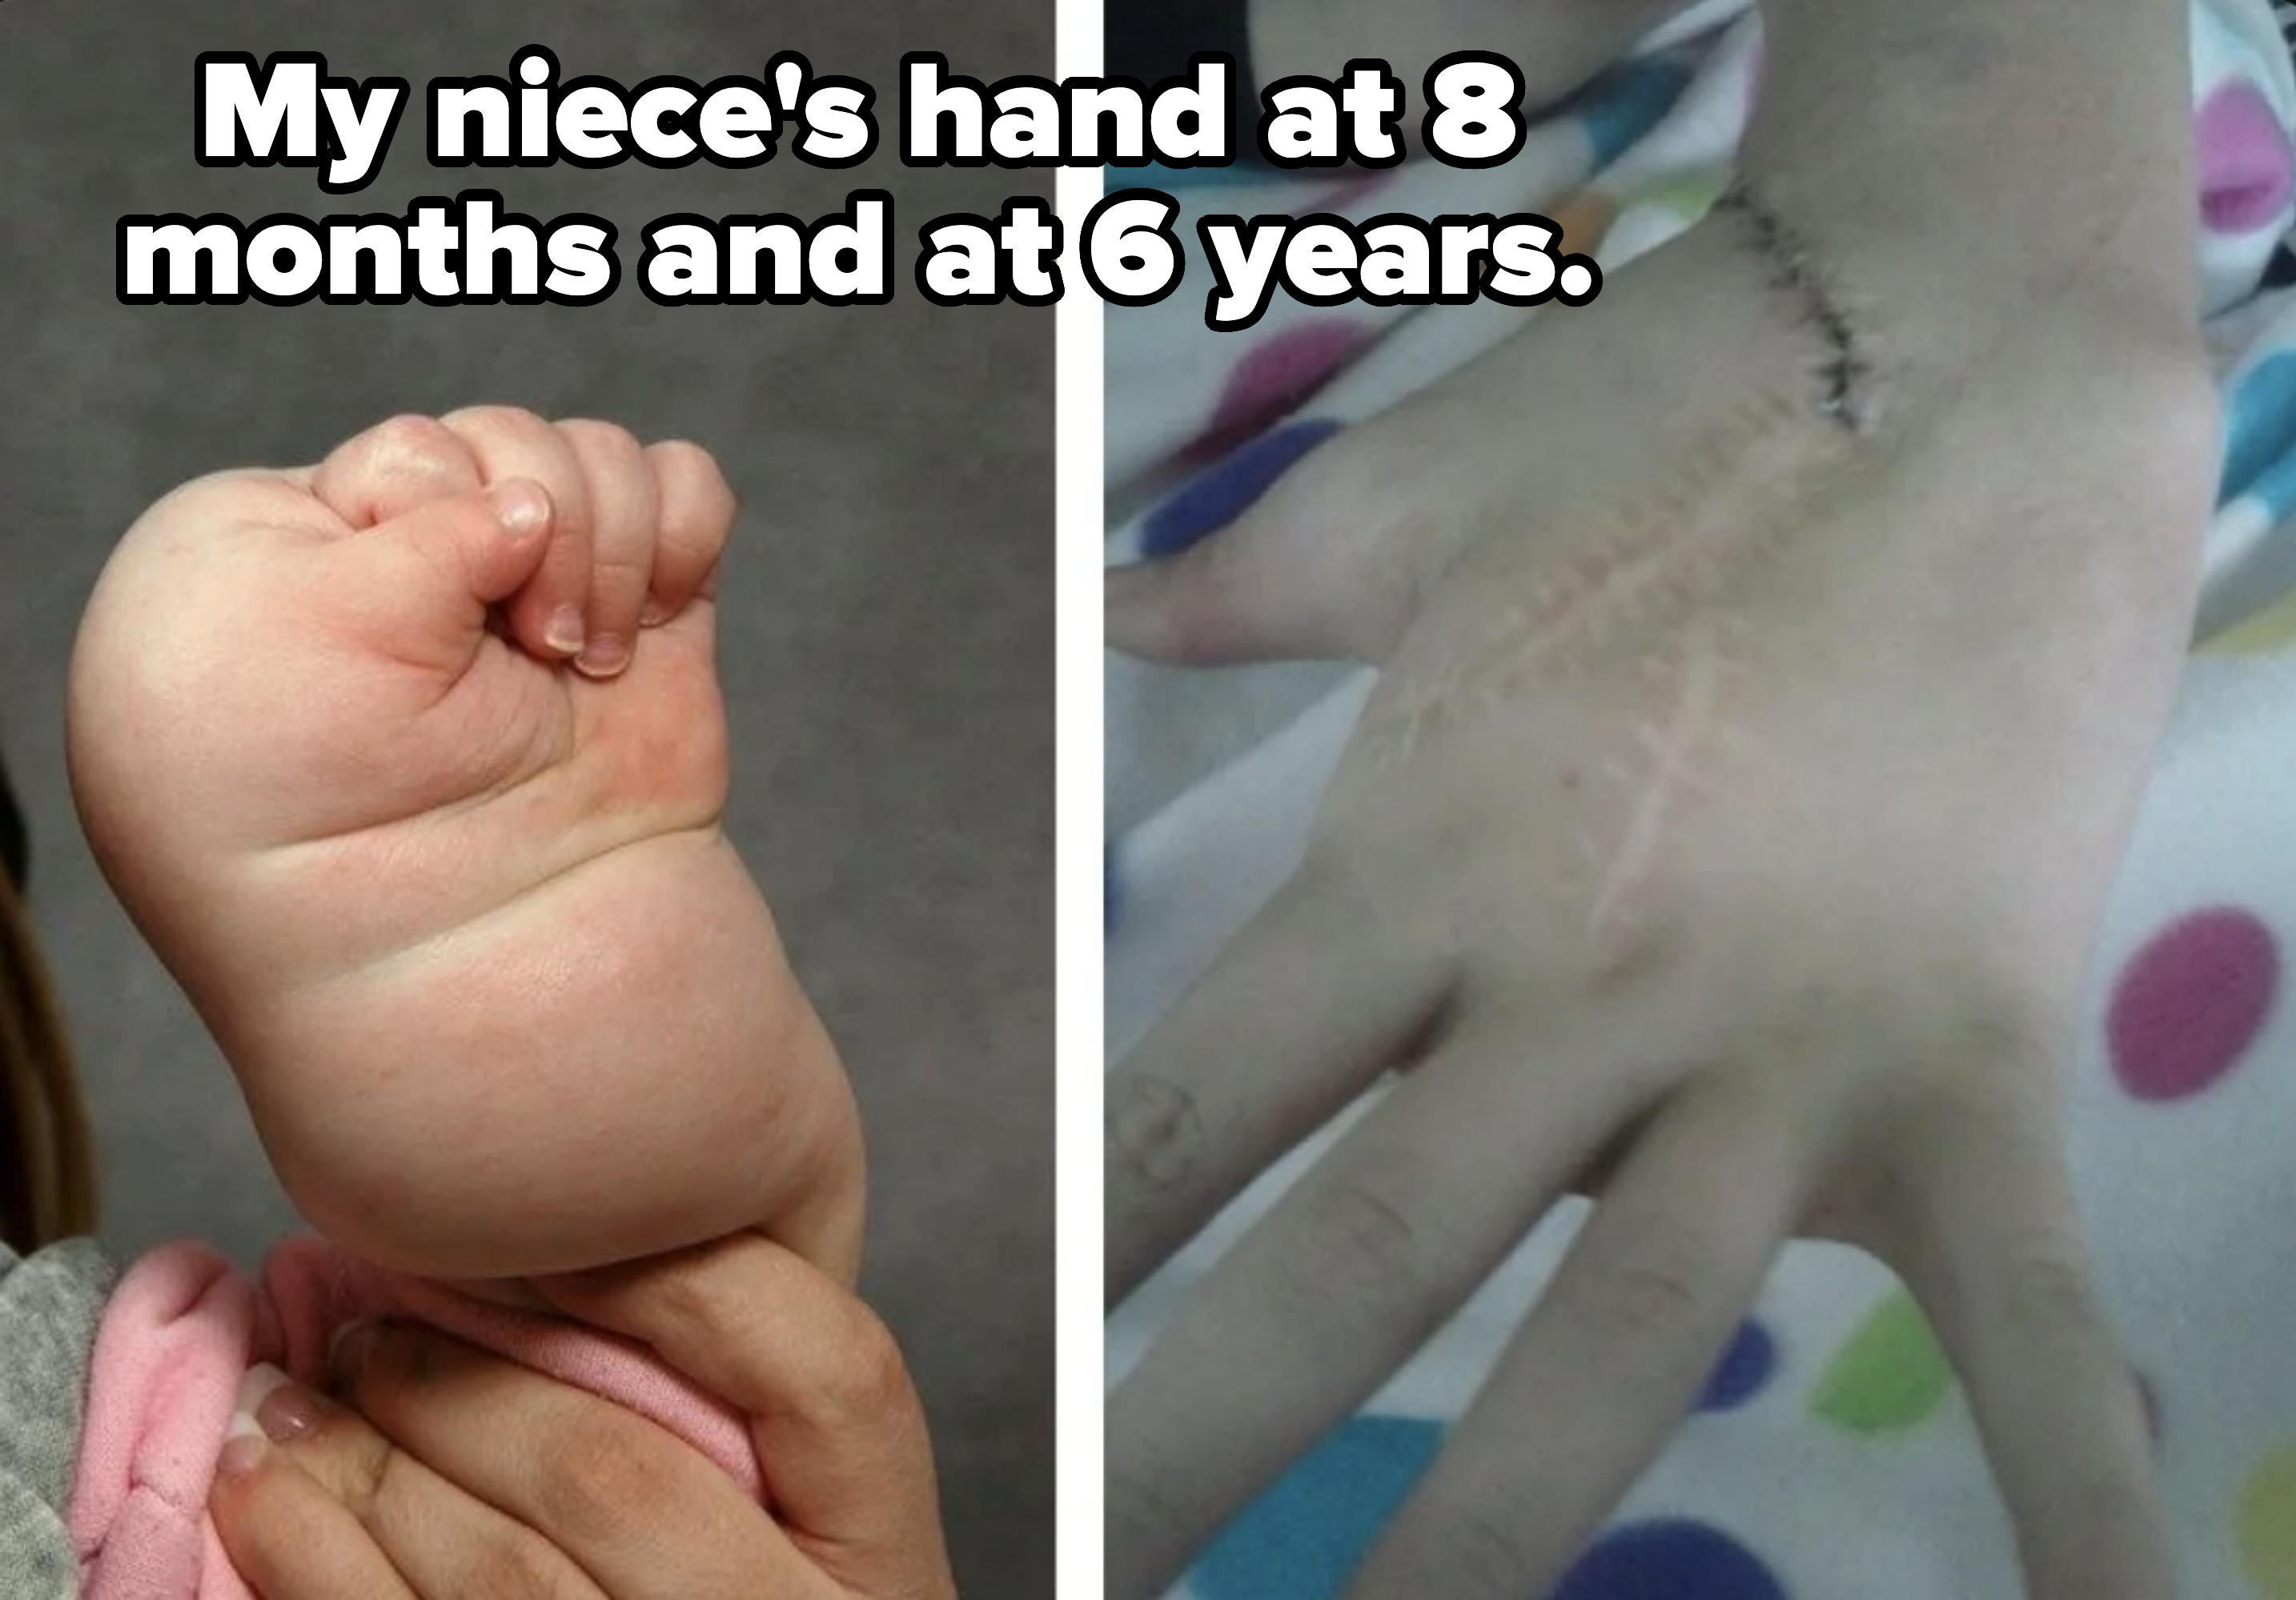 Two images: left shows a baby&#x27;s hand gripping an adult&#x27;s finger; right shows an arm with surgical stitching